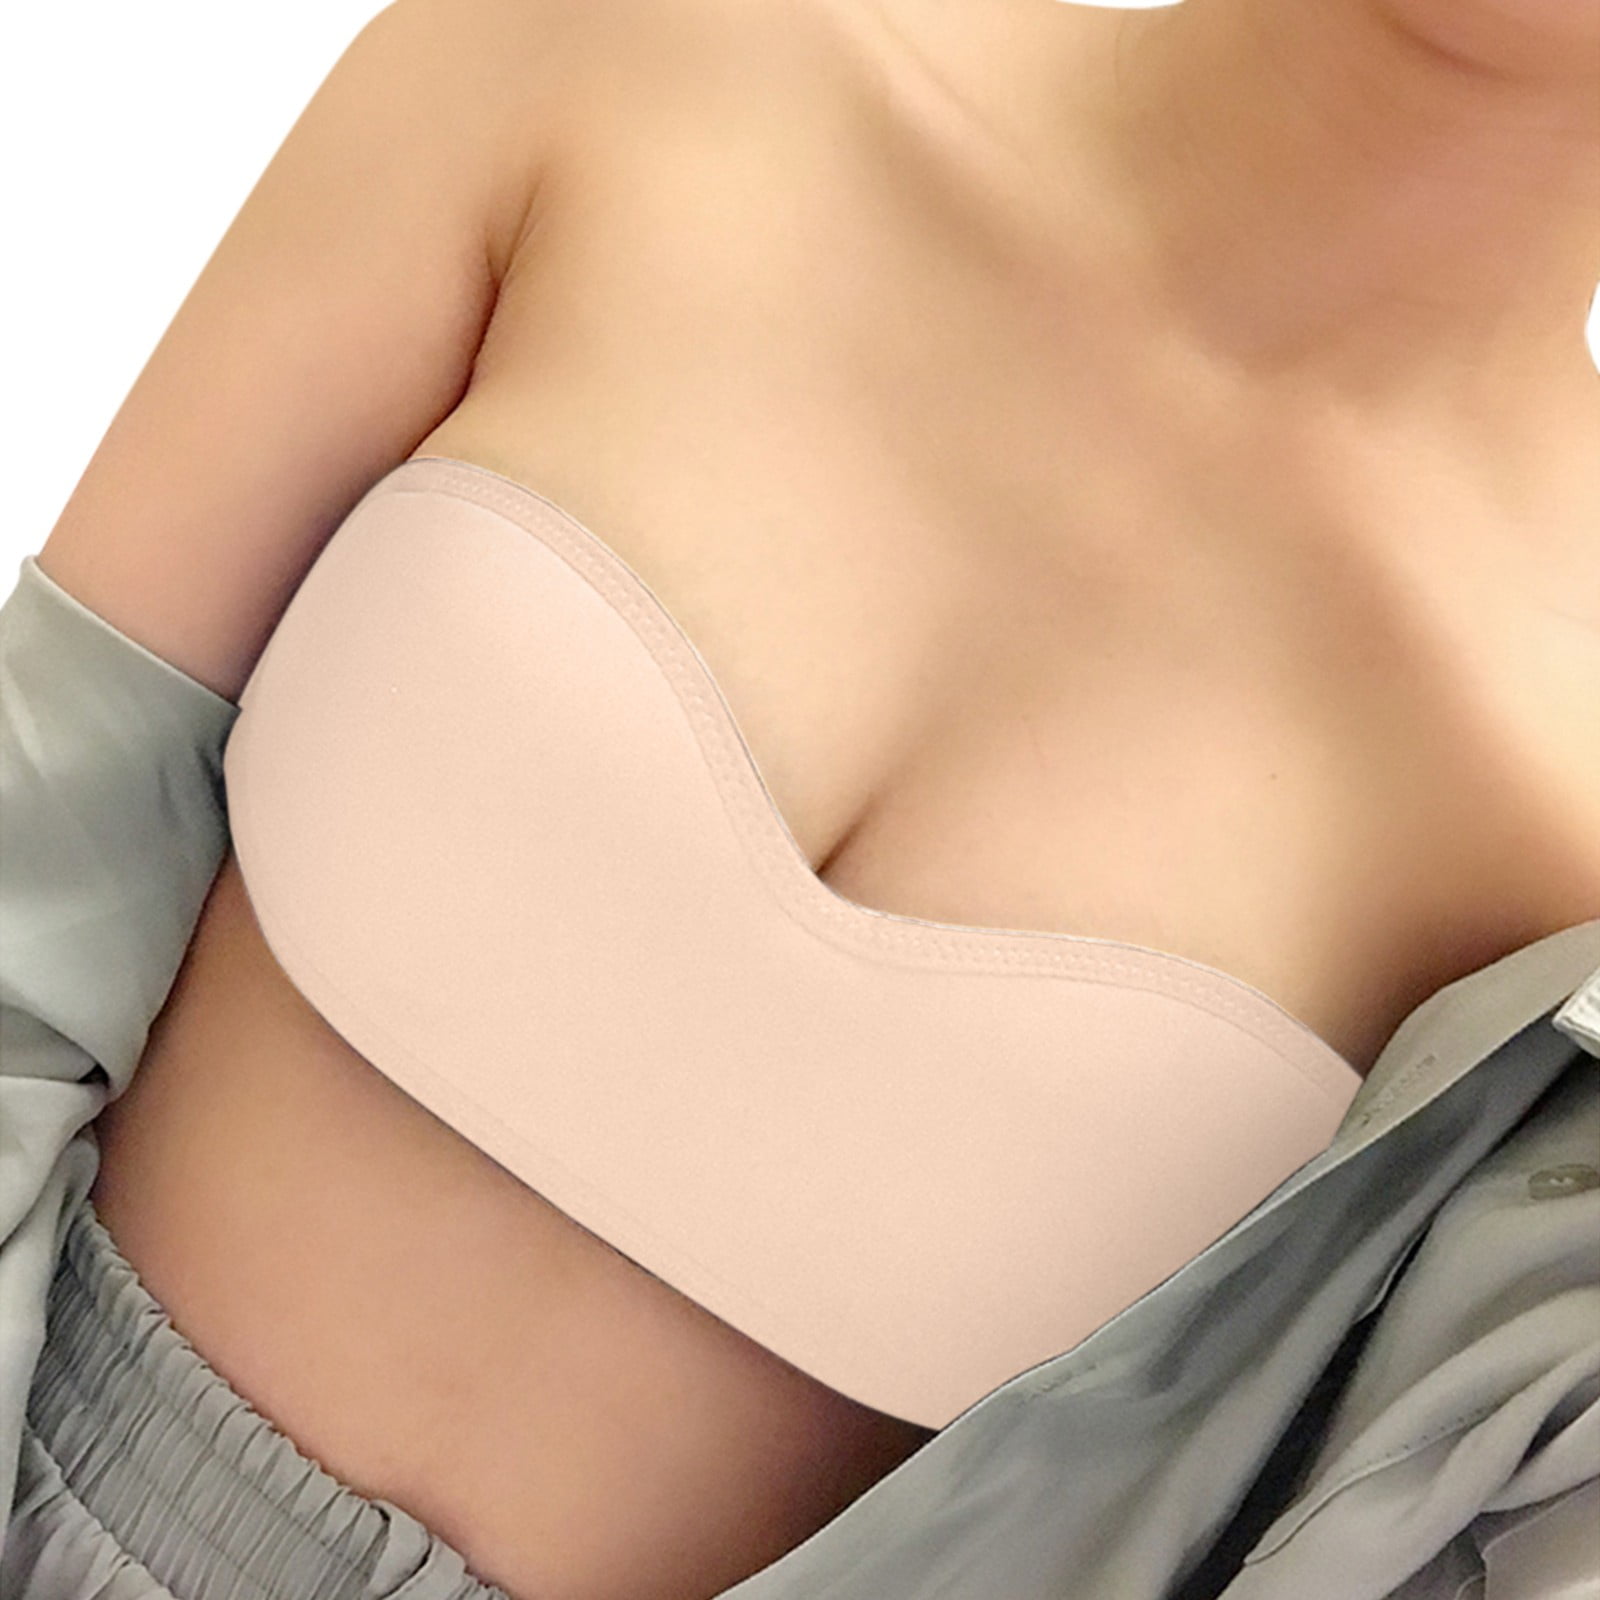 Women Fashion Causal Plus Size Seamless Strapless Bandeau Bra Wrapped  Invisible Chest Wraps Tube Tops